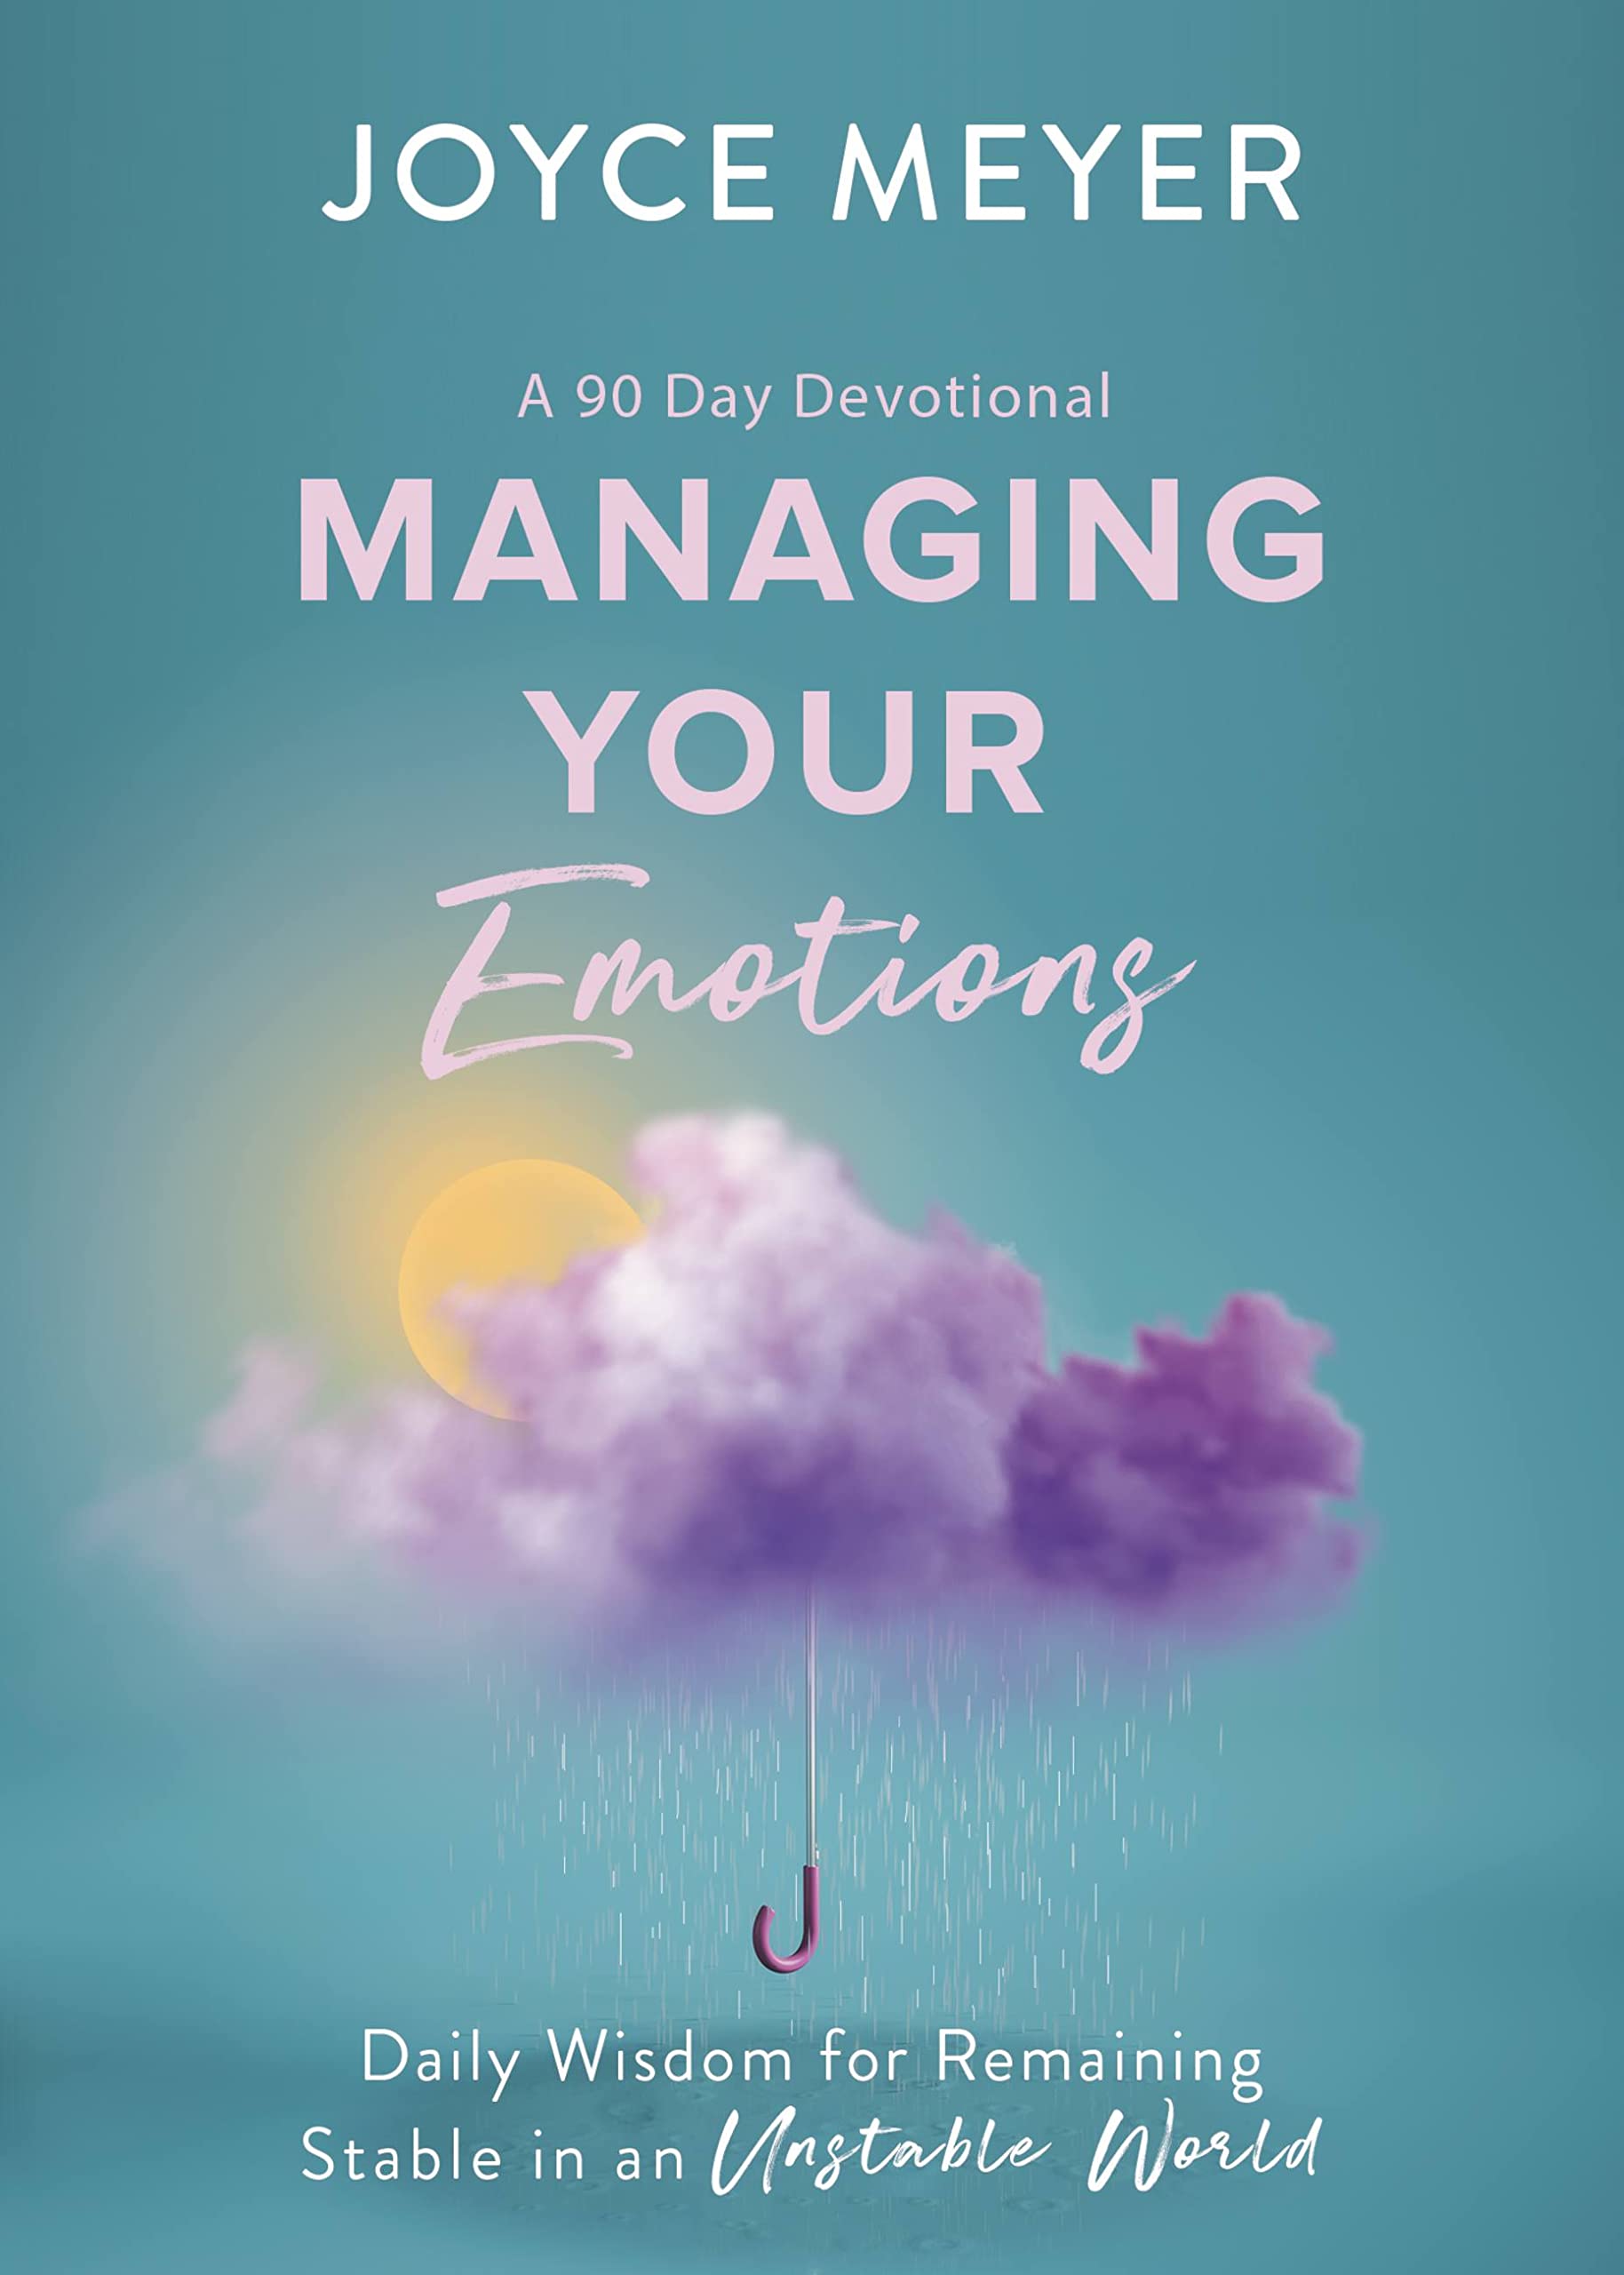 Managing Your Emotions: Daily Wisdom for Remaining Stable in an Unstable World, a 90 Day Devotional by Meyer, Joyce